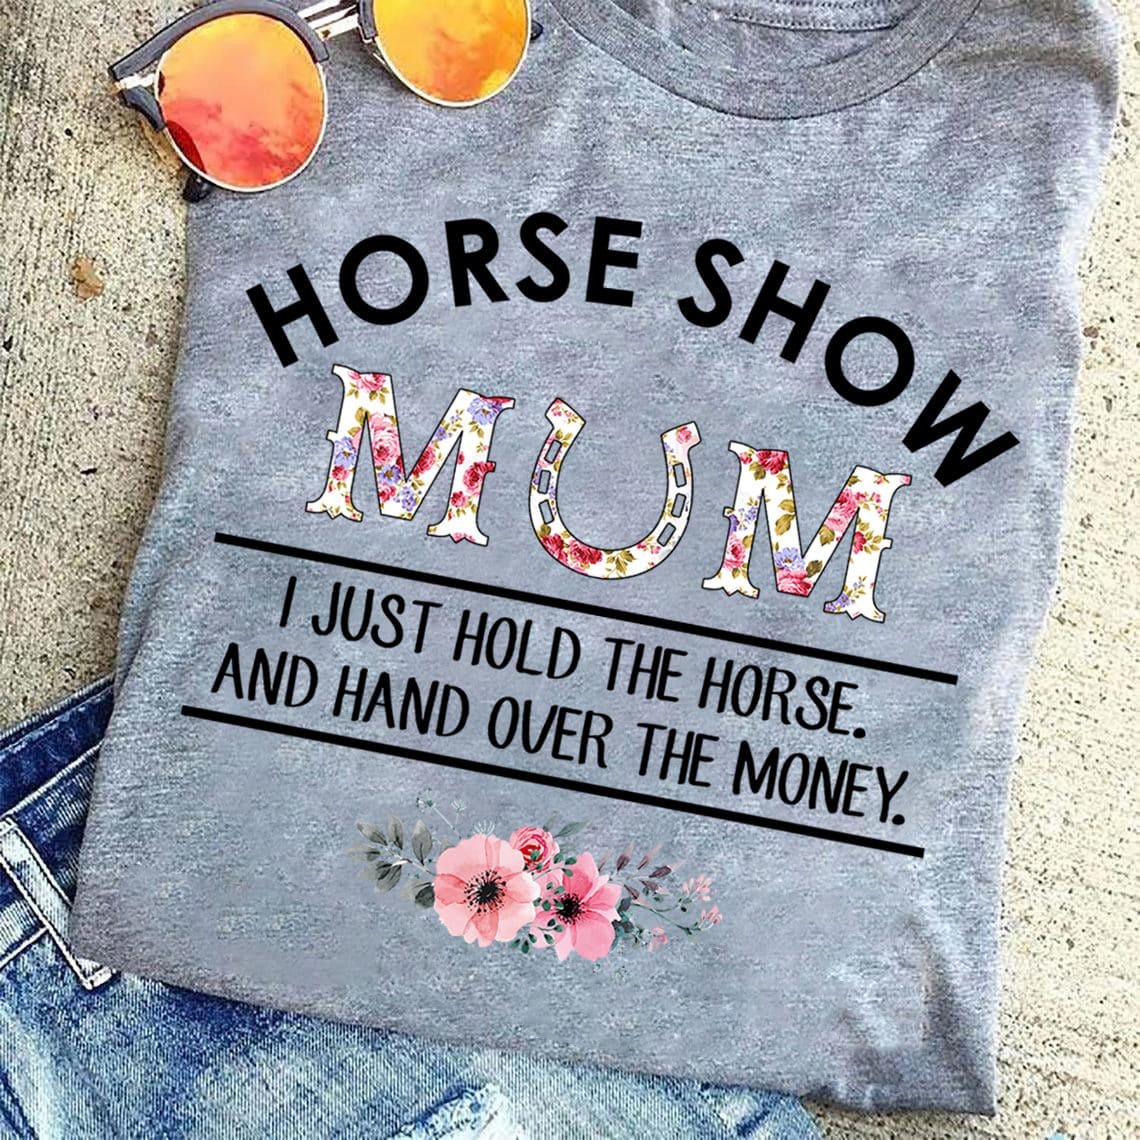 Horse show mum I just hold the horse and hand over the money - Mother loves horse, gift for mother's day